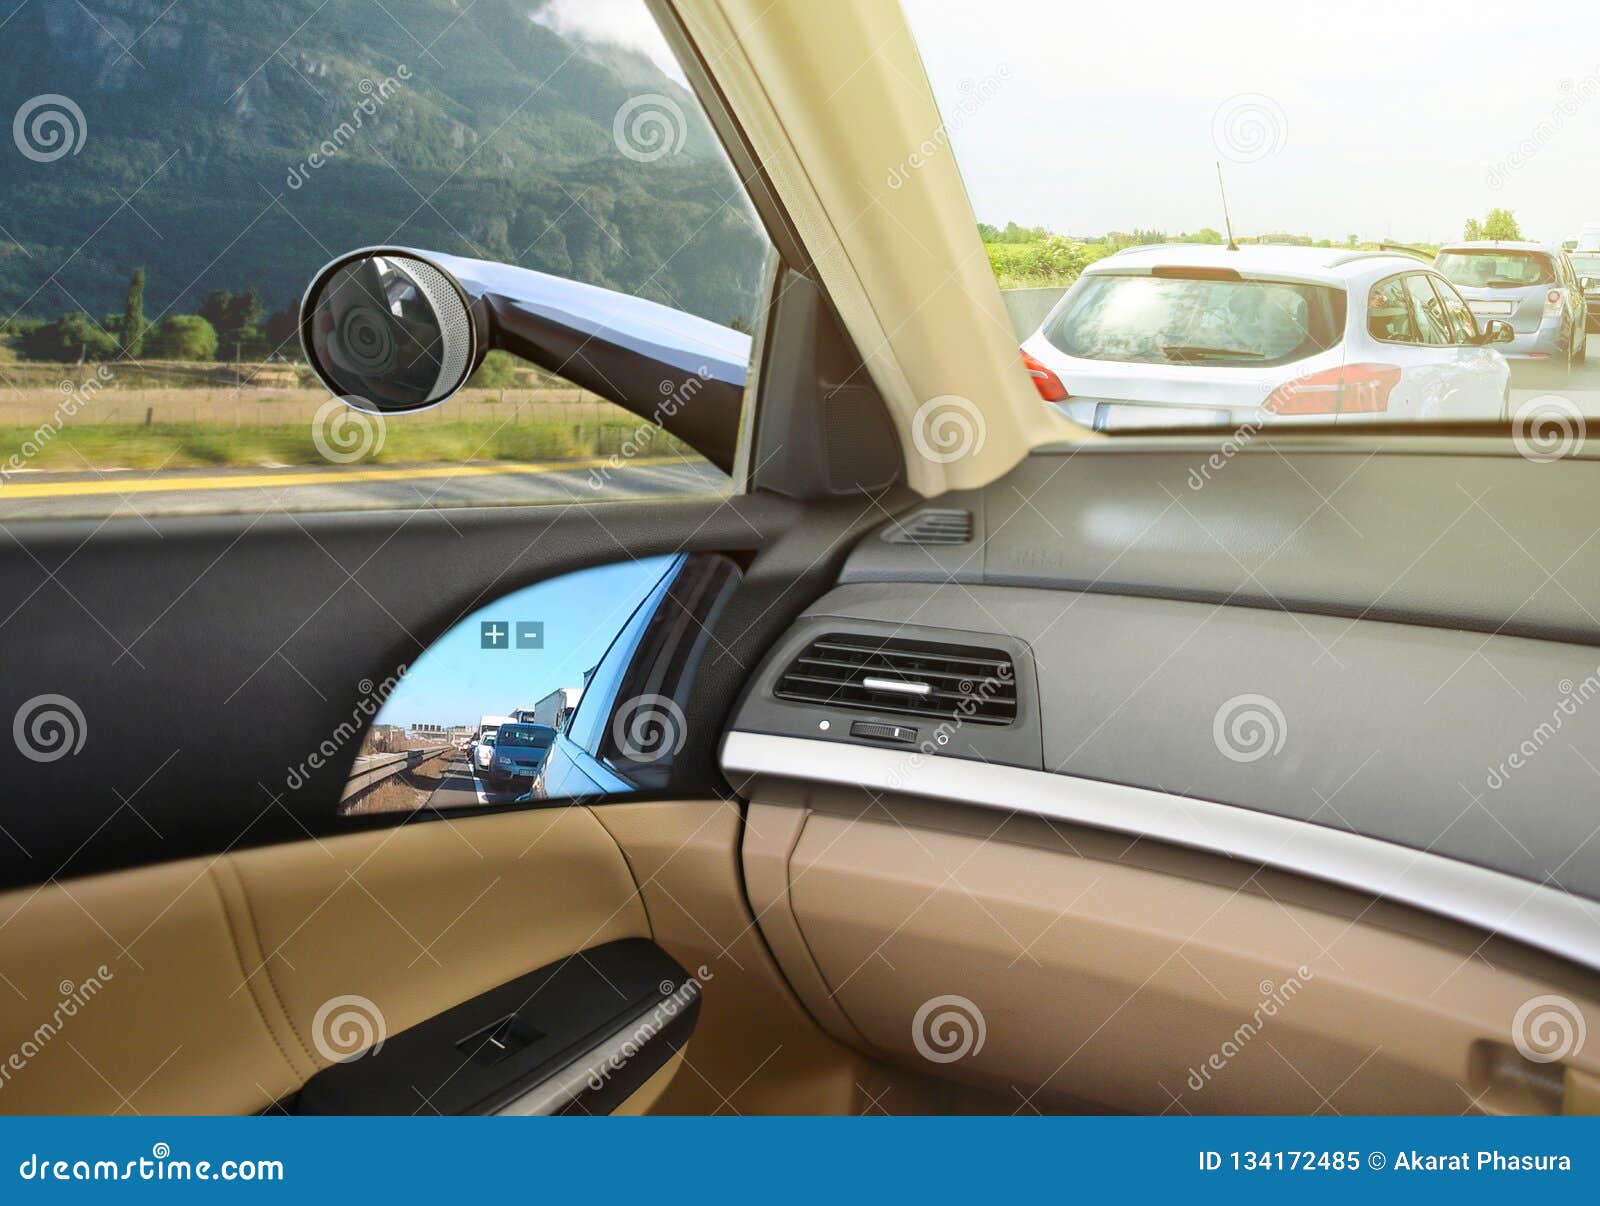 conceptual  of virtual side mirrors, use small cameras instead of mirrors, aerodynamic